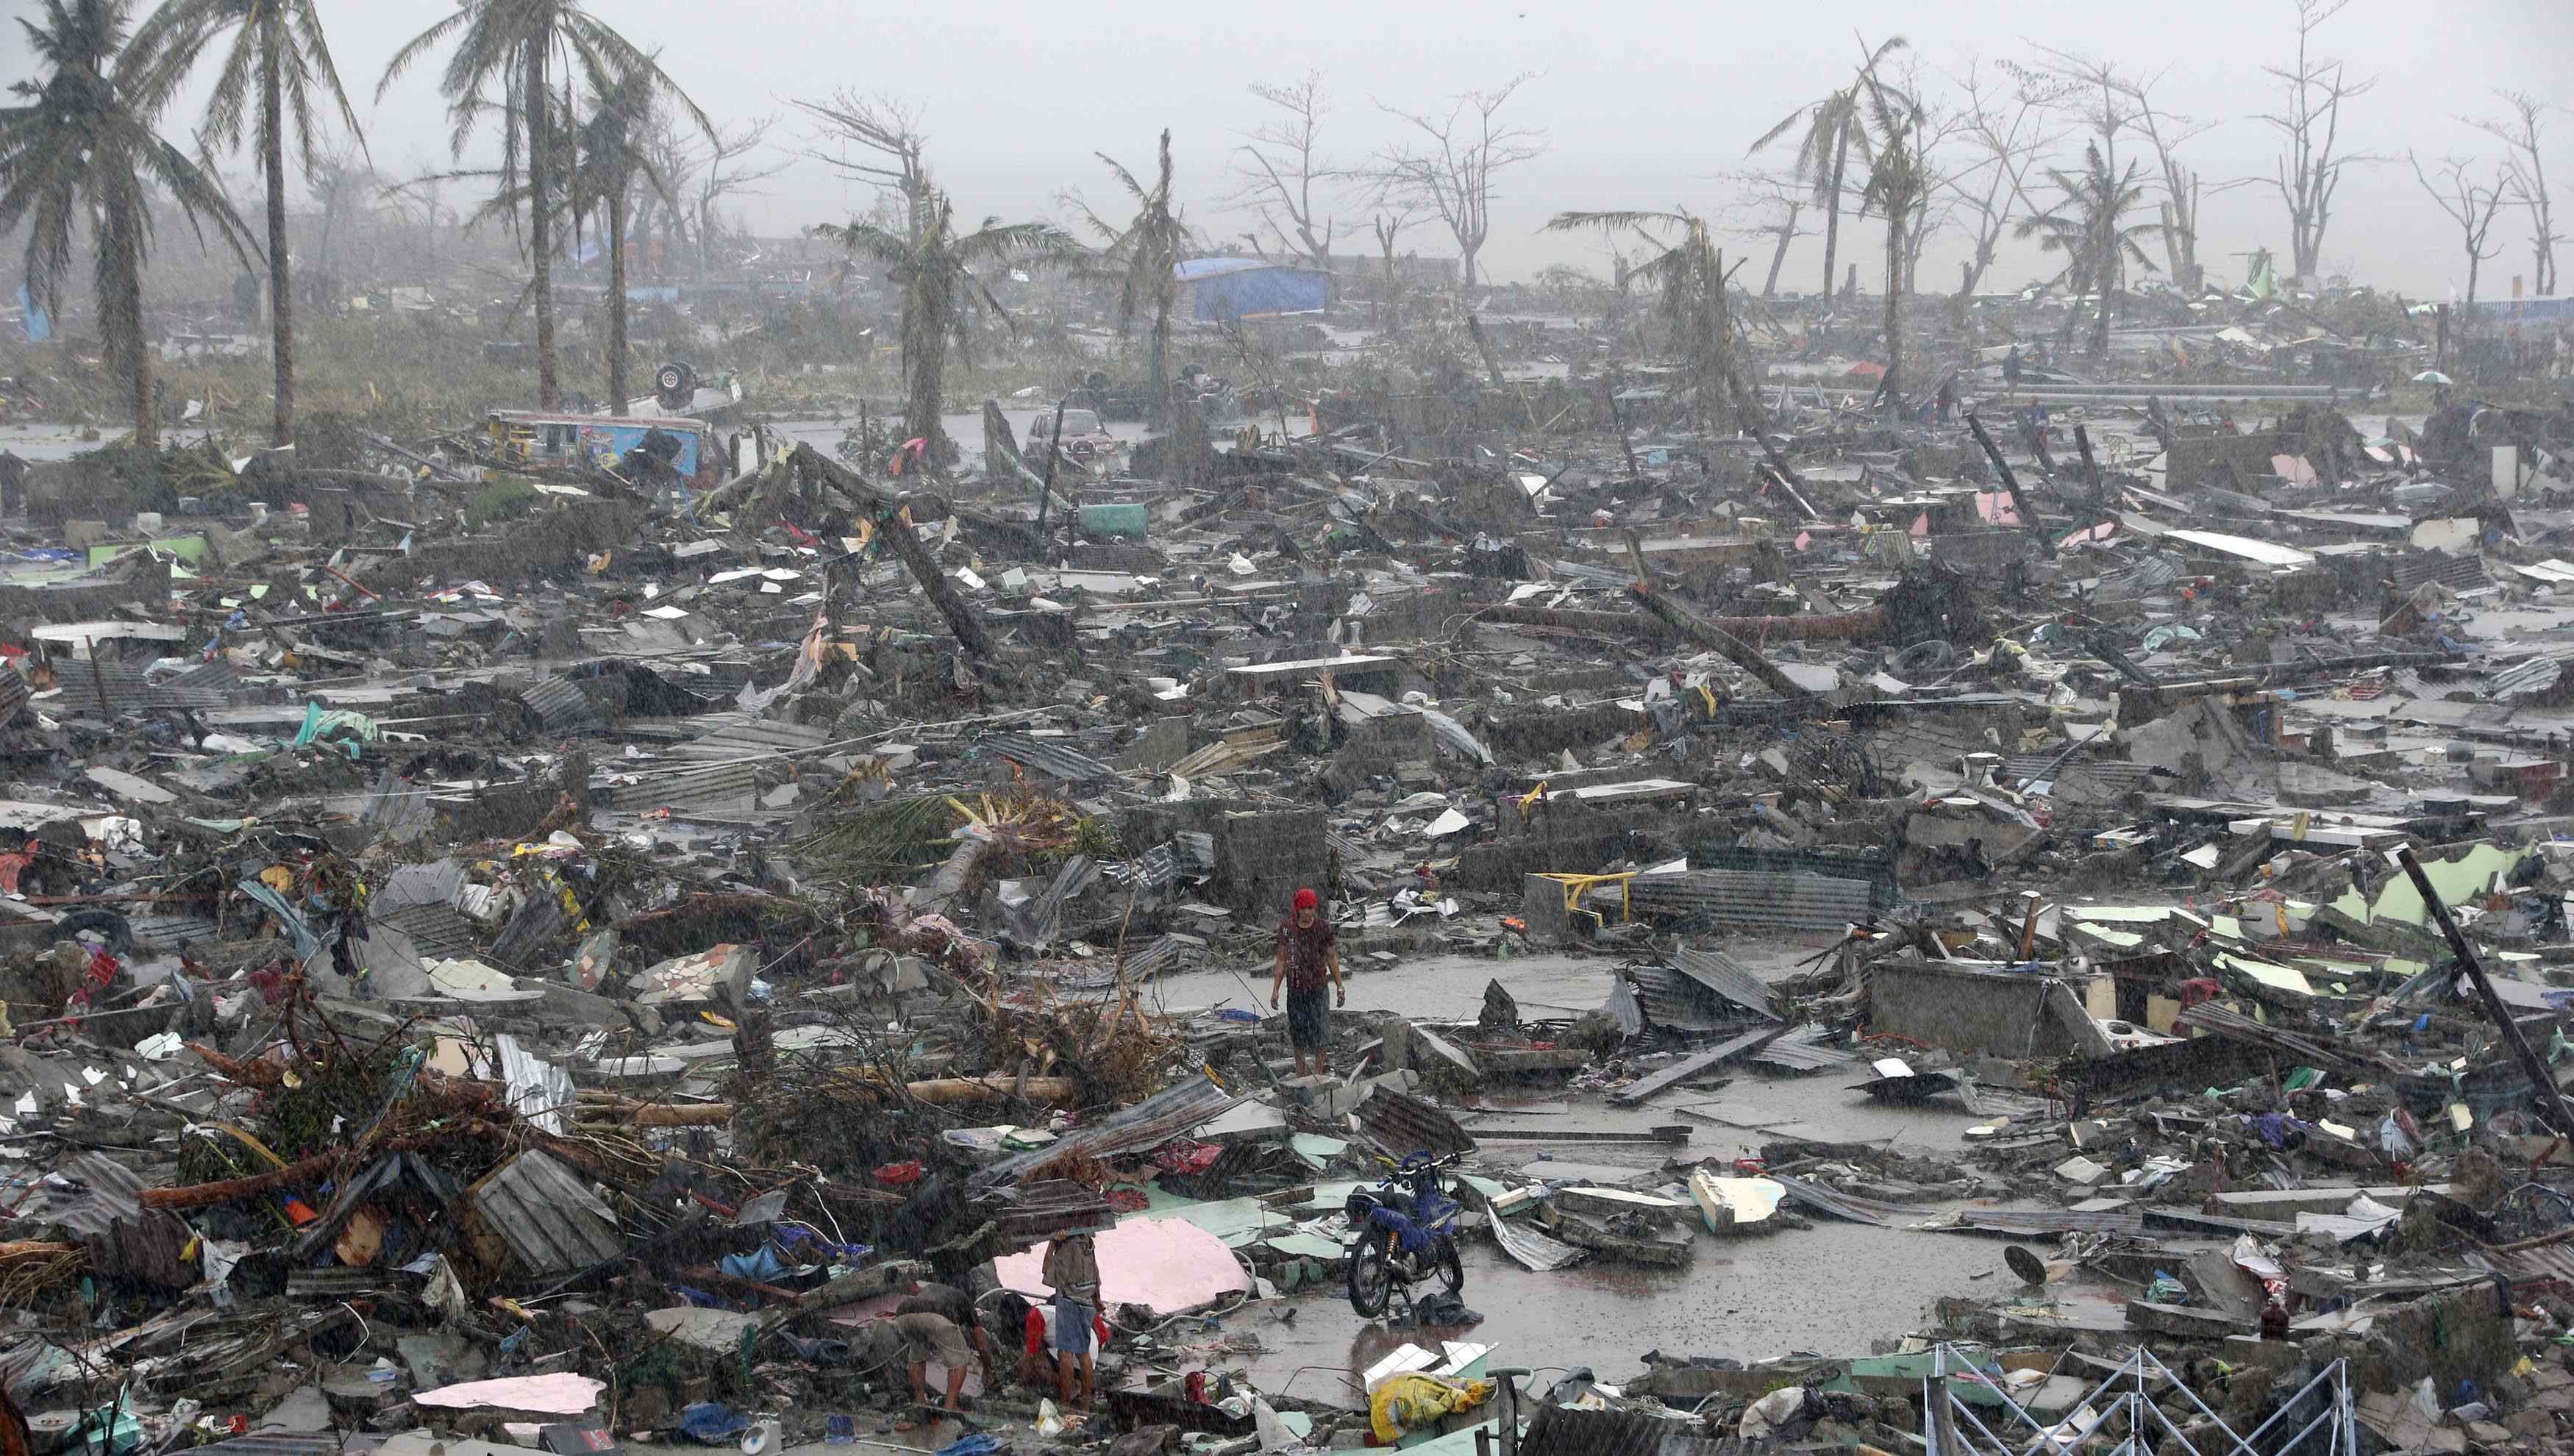 The devastation wreaked by Super Typhoon Haiyan on the city of Tacloban in the central Philippines. Scientists say storms are becoming more intense because of global warming. Photos: AFP; K.Y. Cheng; Dickson Lee; EPA; Edward Wong